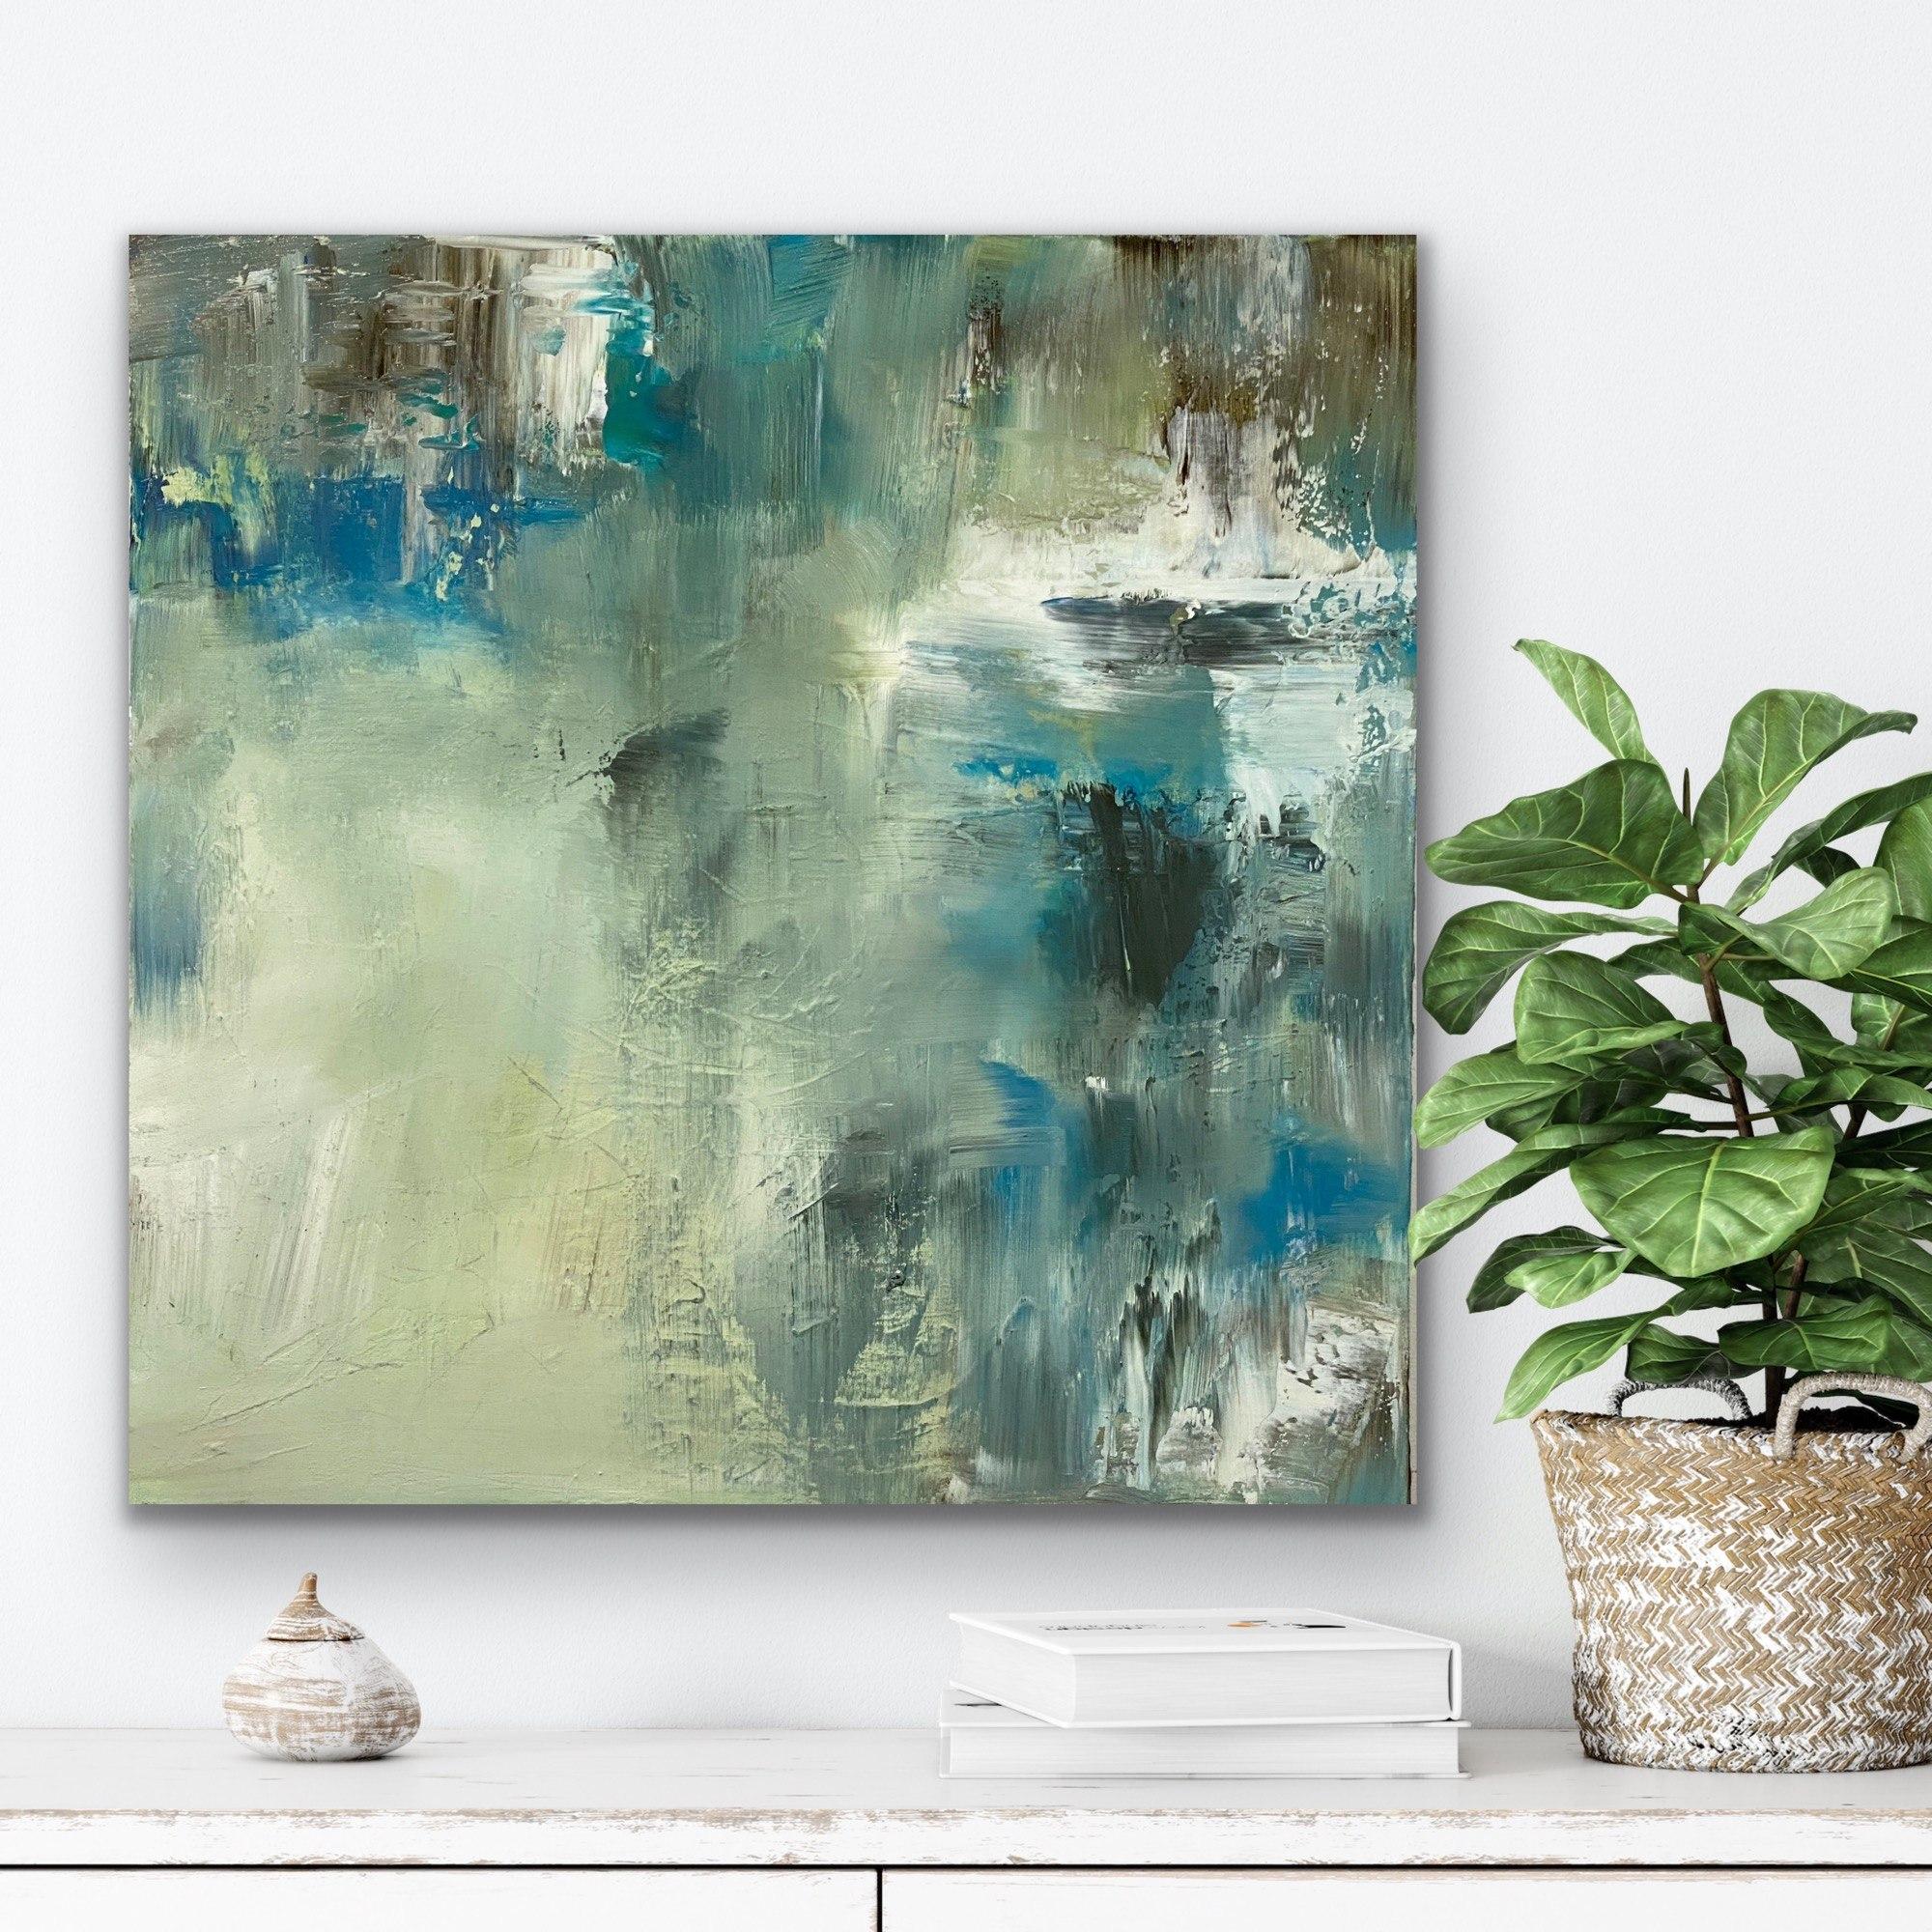 Out of the Blue, blue, yellow, green, brown, white, abstract expressionism - Gray Abstract Painting by Juanita Bellavance 